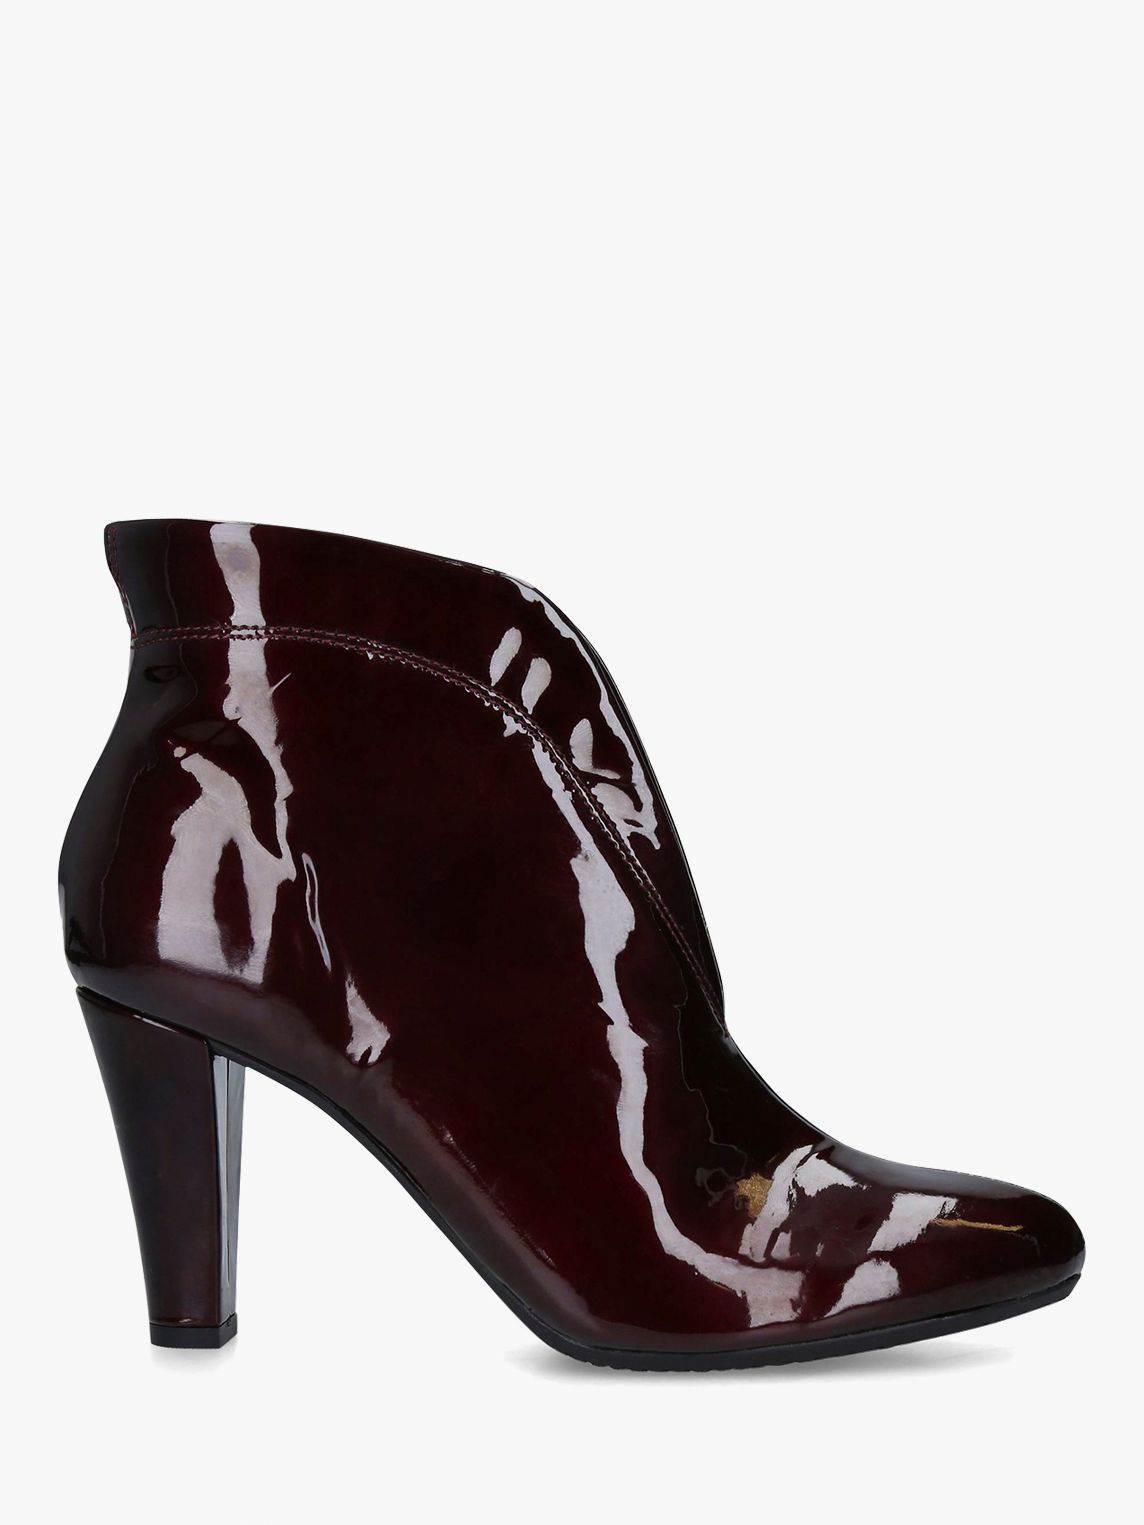 Carvela Comfort Rida Patent Leather Ankle Boots, Red Wine